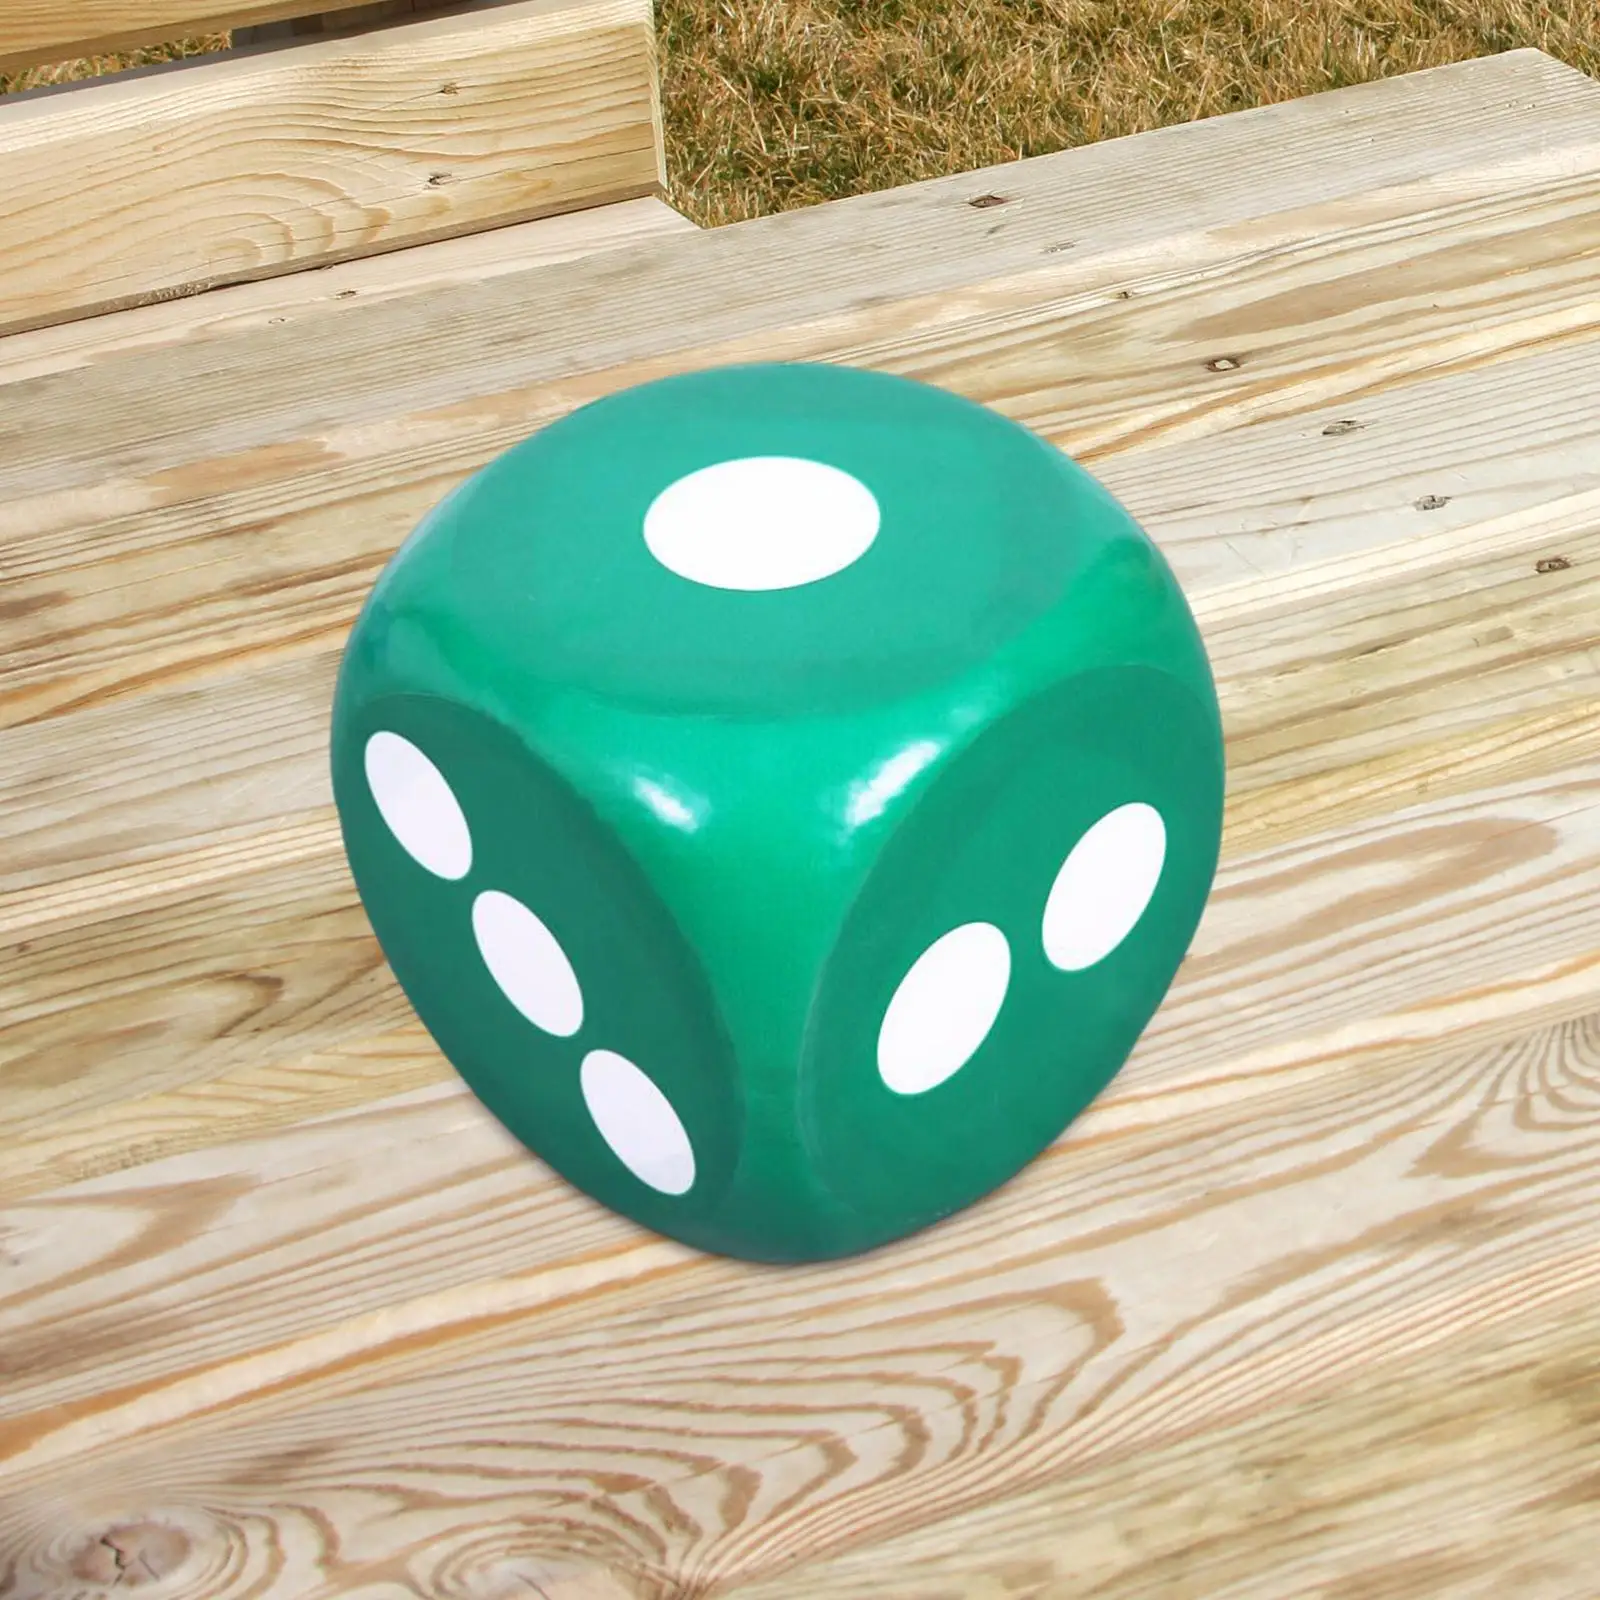 Foam Dice Building Toys Developmental Toy Stem 5.9 inch Large Dice Cubes Game Dice for Children Boys Girls Party Favors Pastime